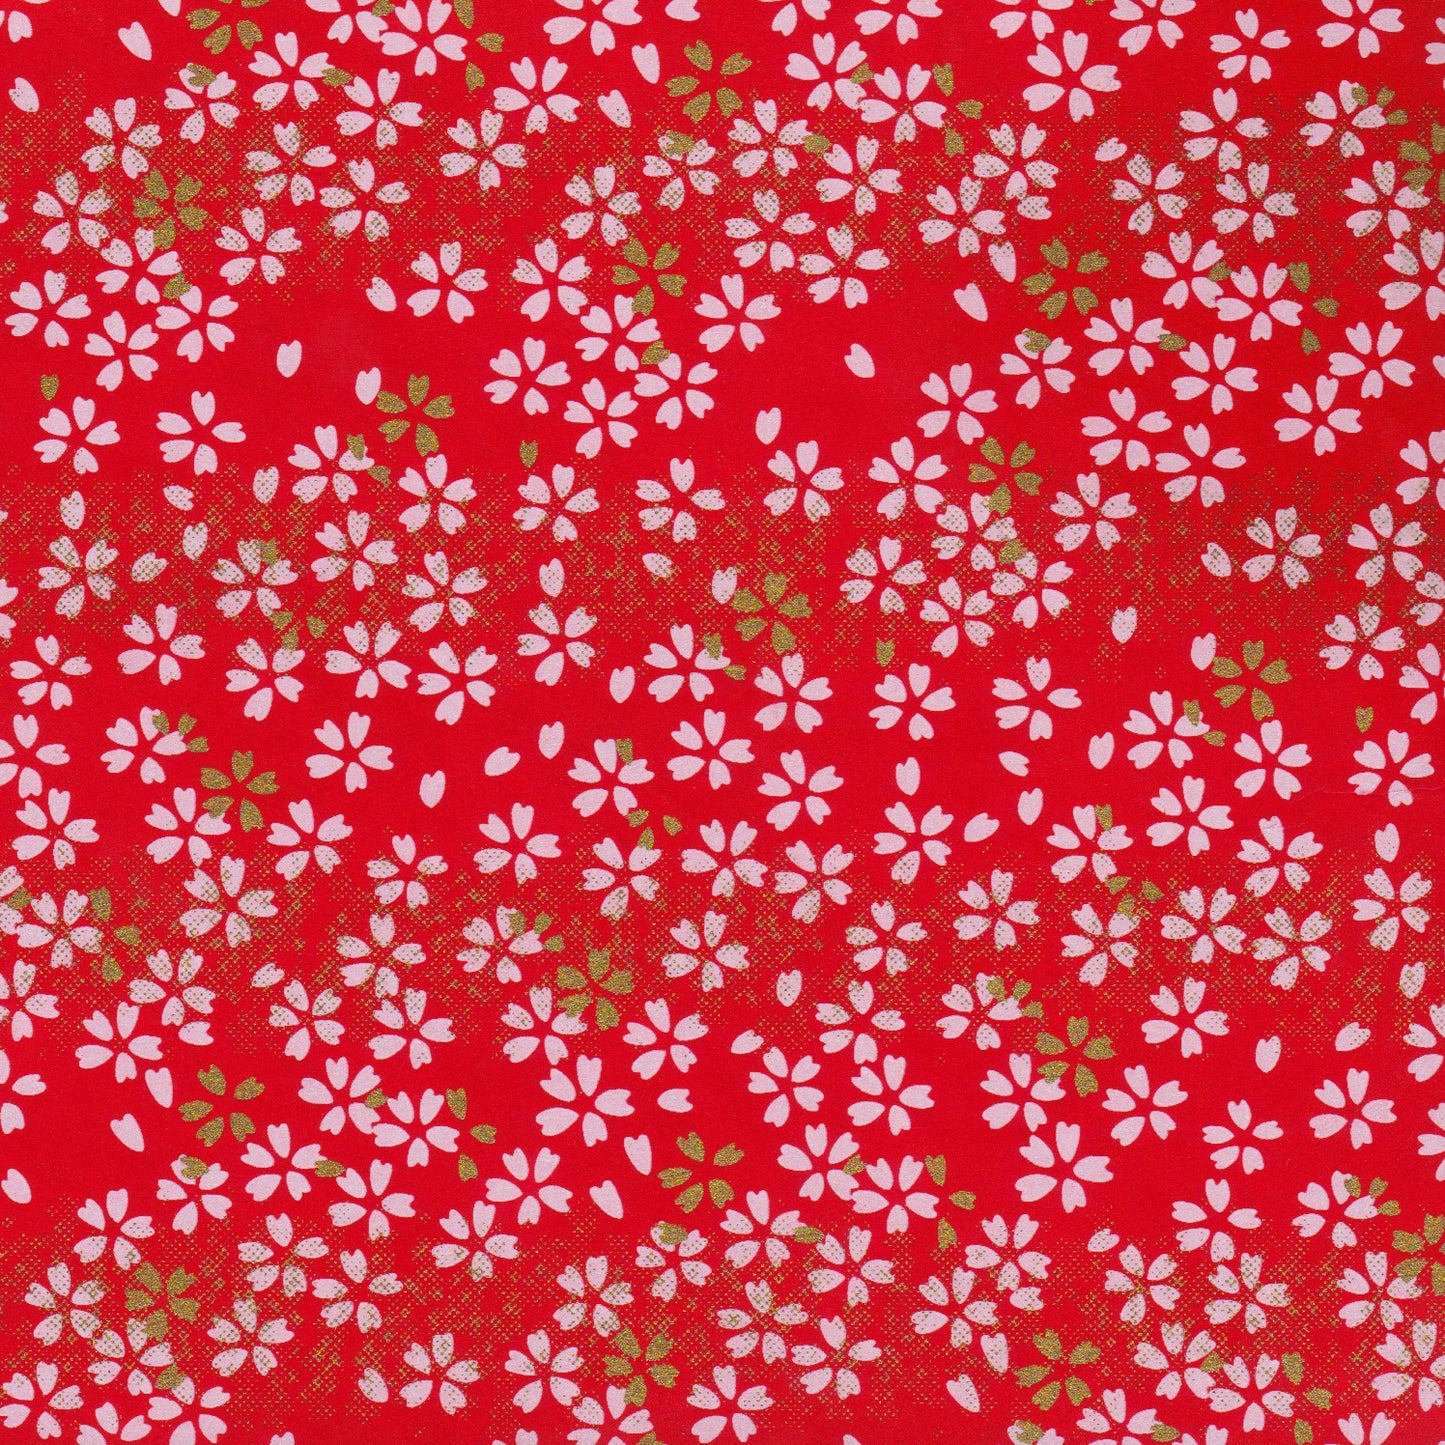 Yuzen Washi Wrapping Paper HZ-063 - Cherry Blossom Red - washi paper - Lavender Home London